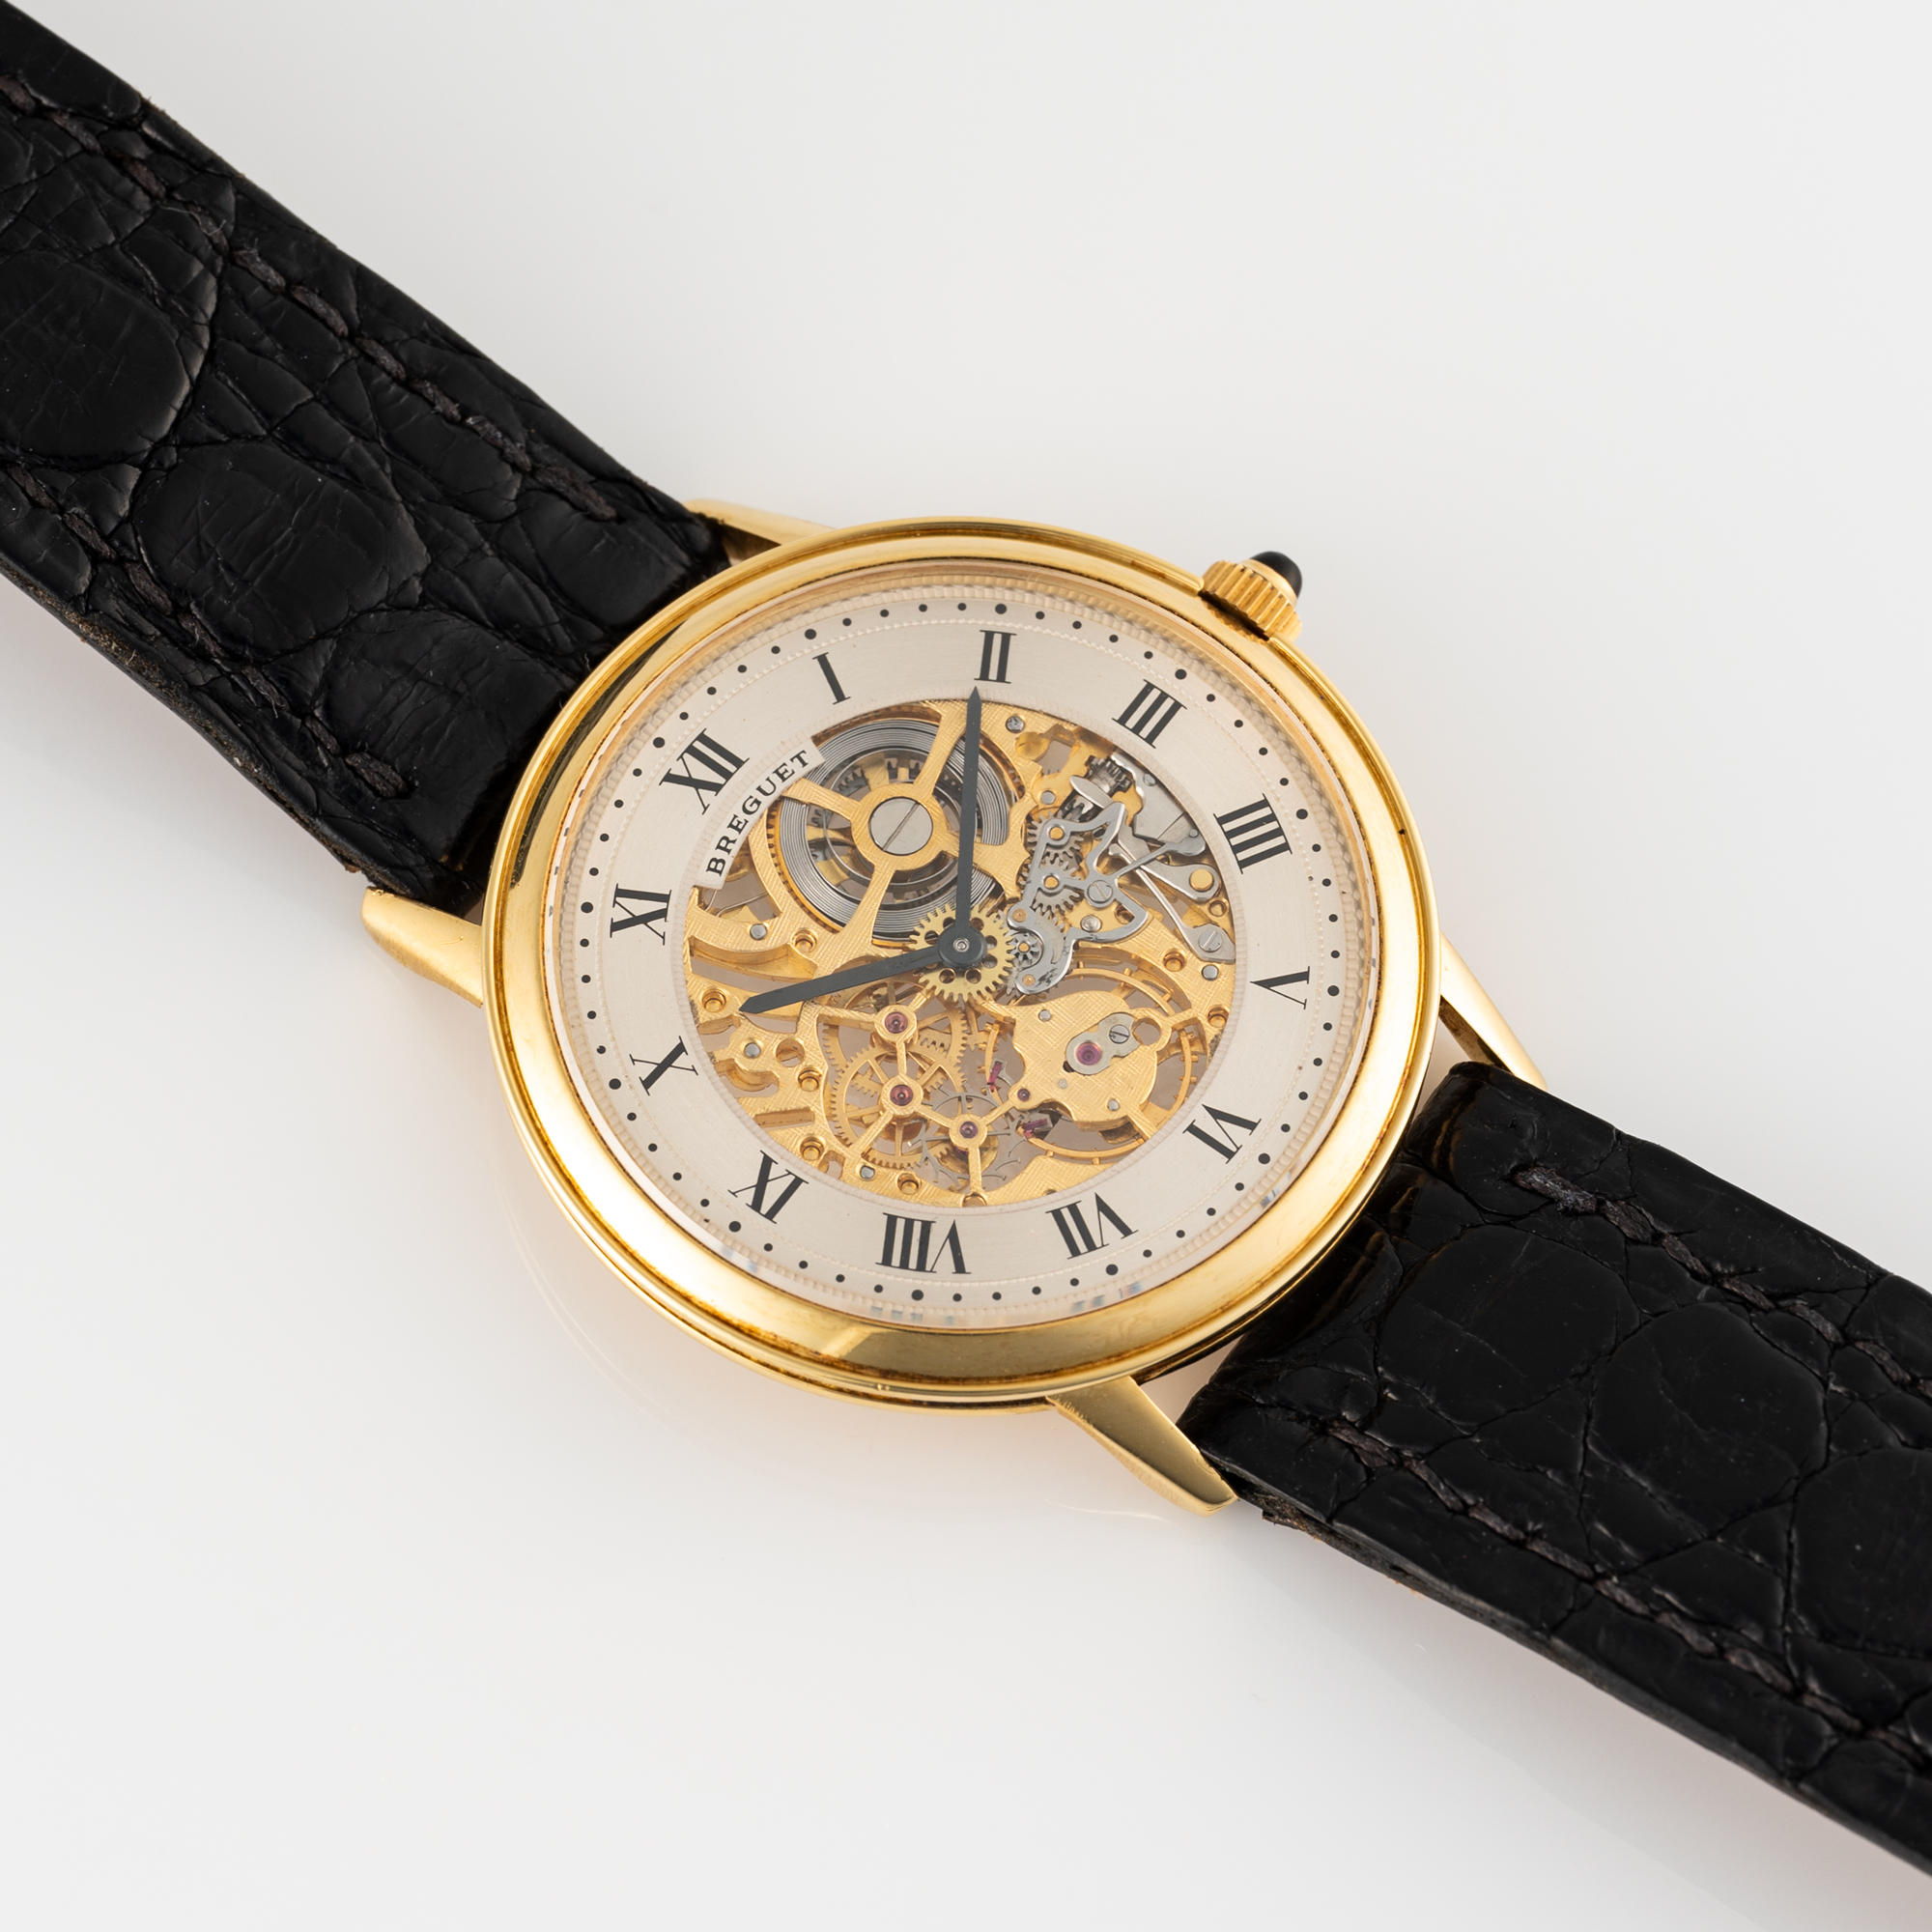 A VERY RARE GENTLEMAN'S SIZE 18K SOLID GOLD BREGUET CLASSIQUE EXTRA PLAT SKELETONISED WRIST WATCH - Image 4 of 9